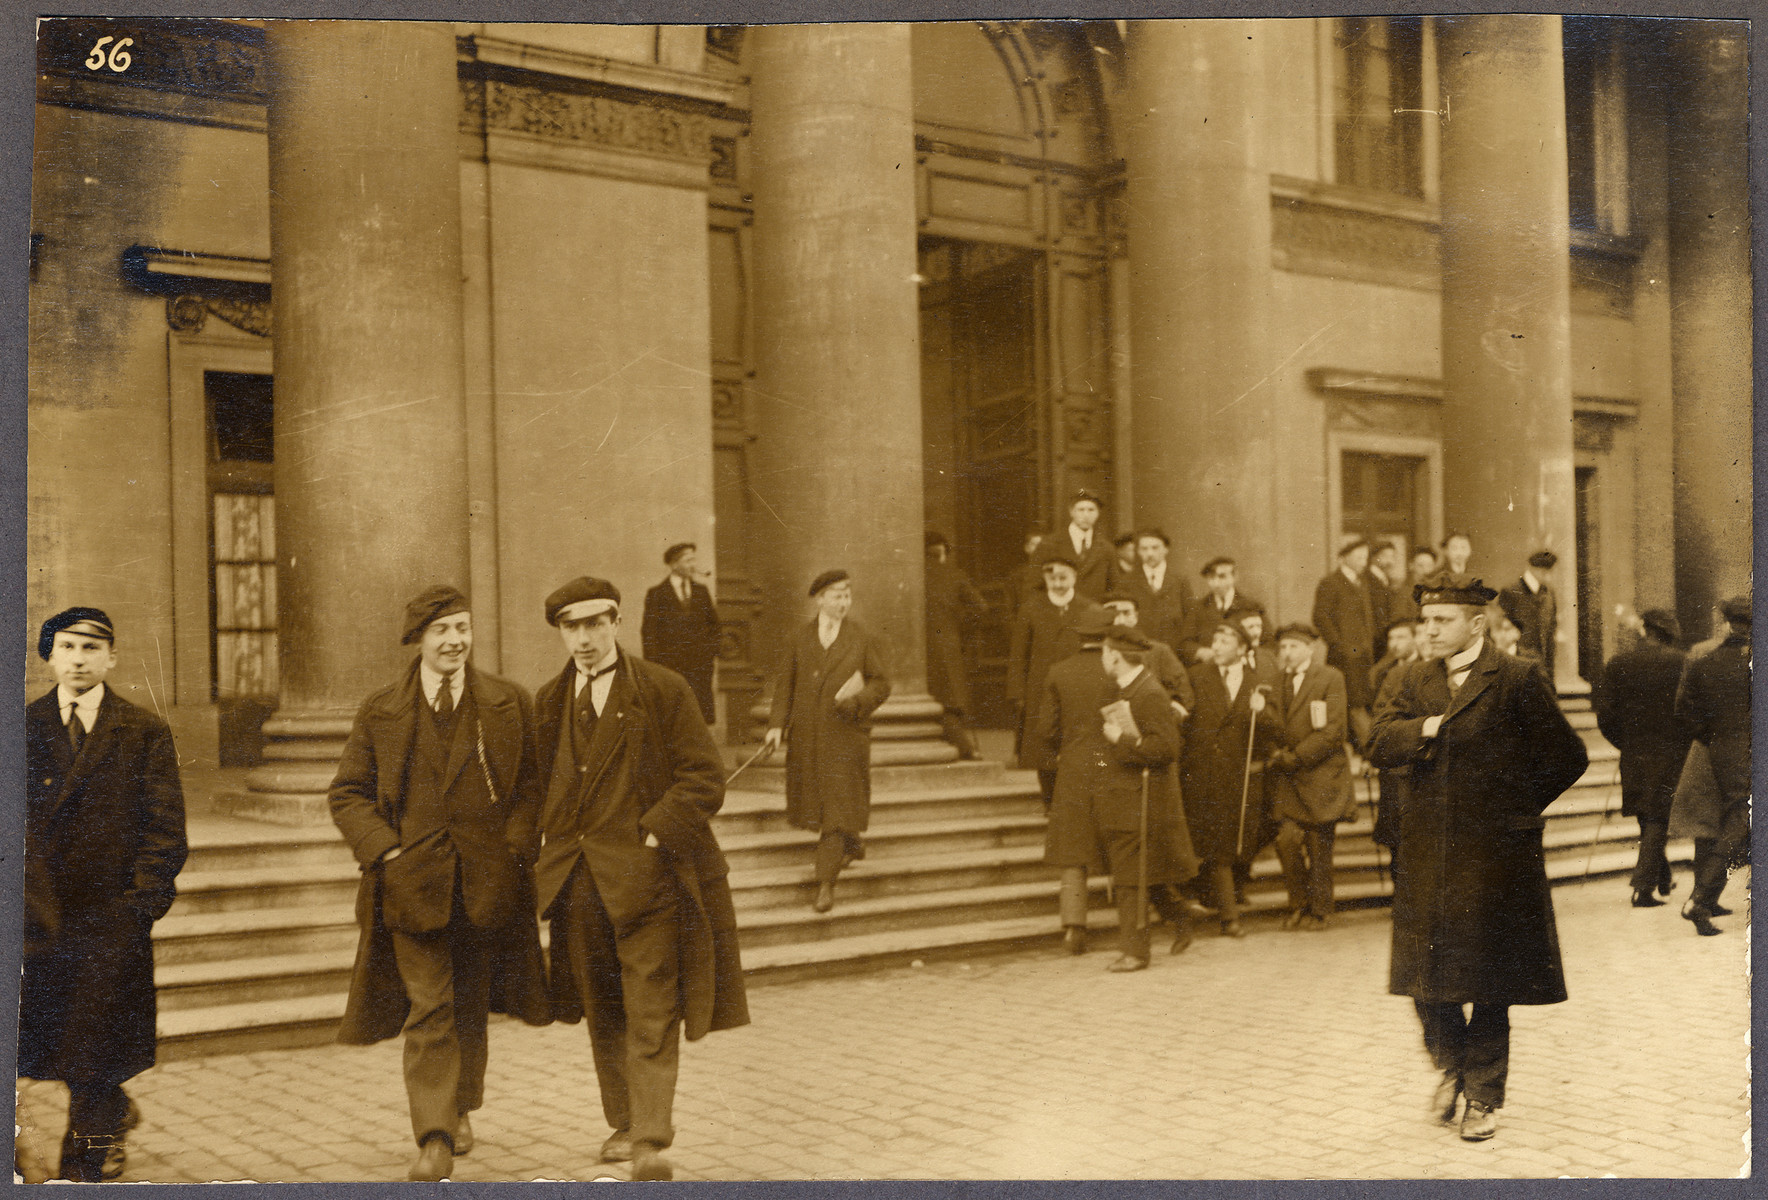 Students stand before the Aula building at Von Bissing University, founded during the German occupation of Belgium in WWI.